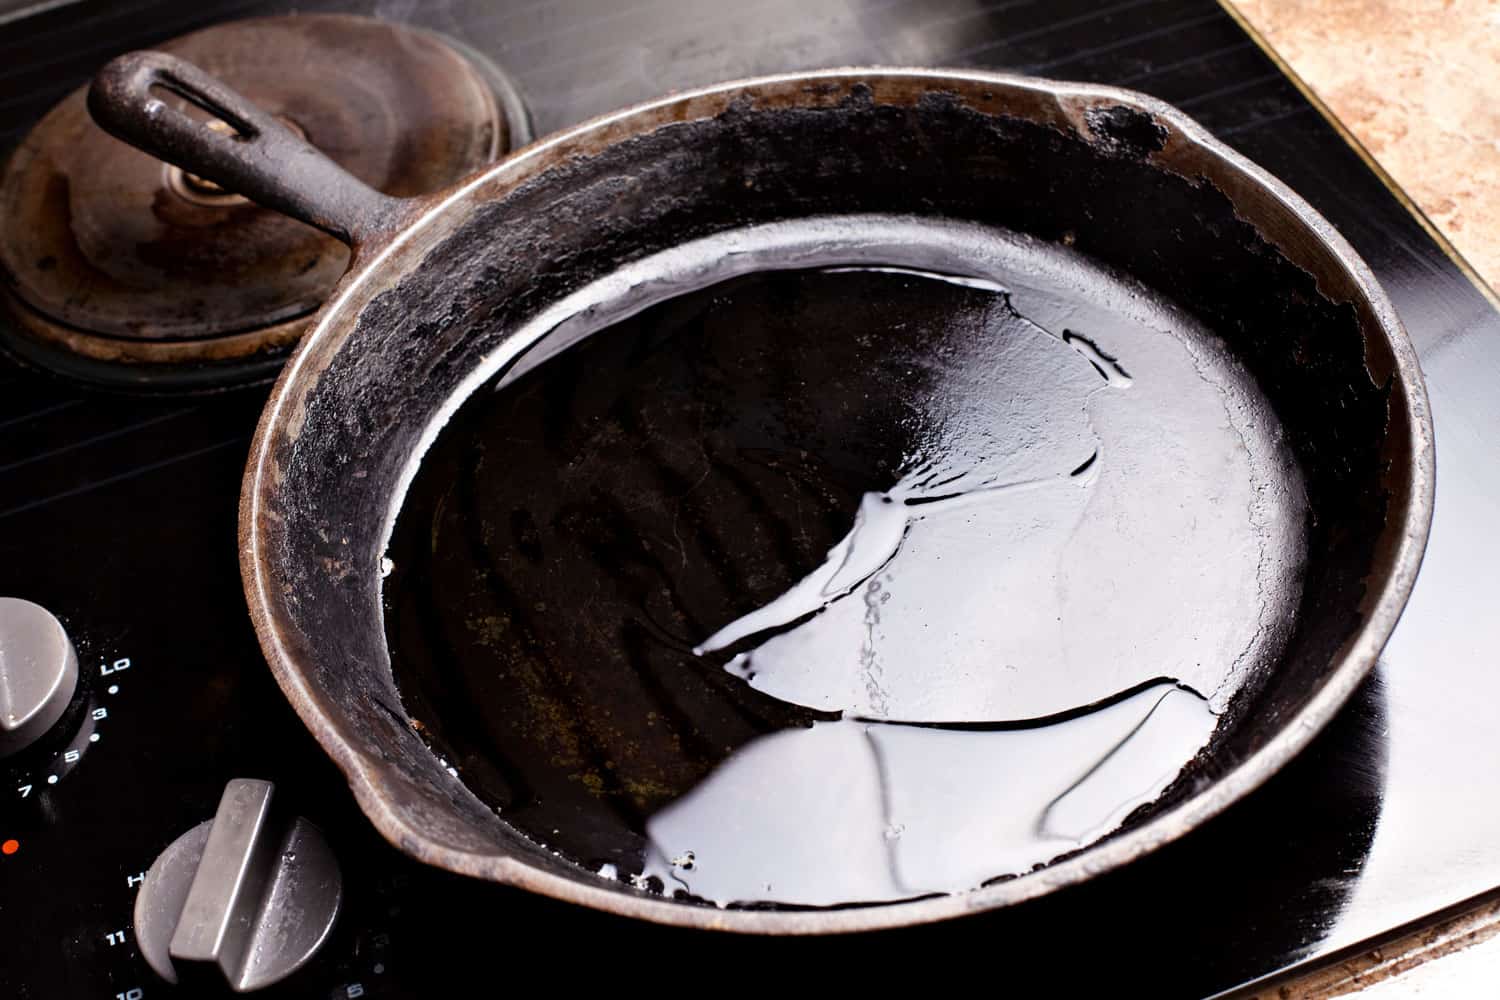 An old frying pan with cooking oil on it